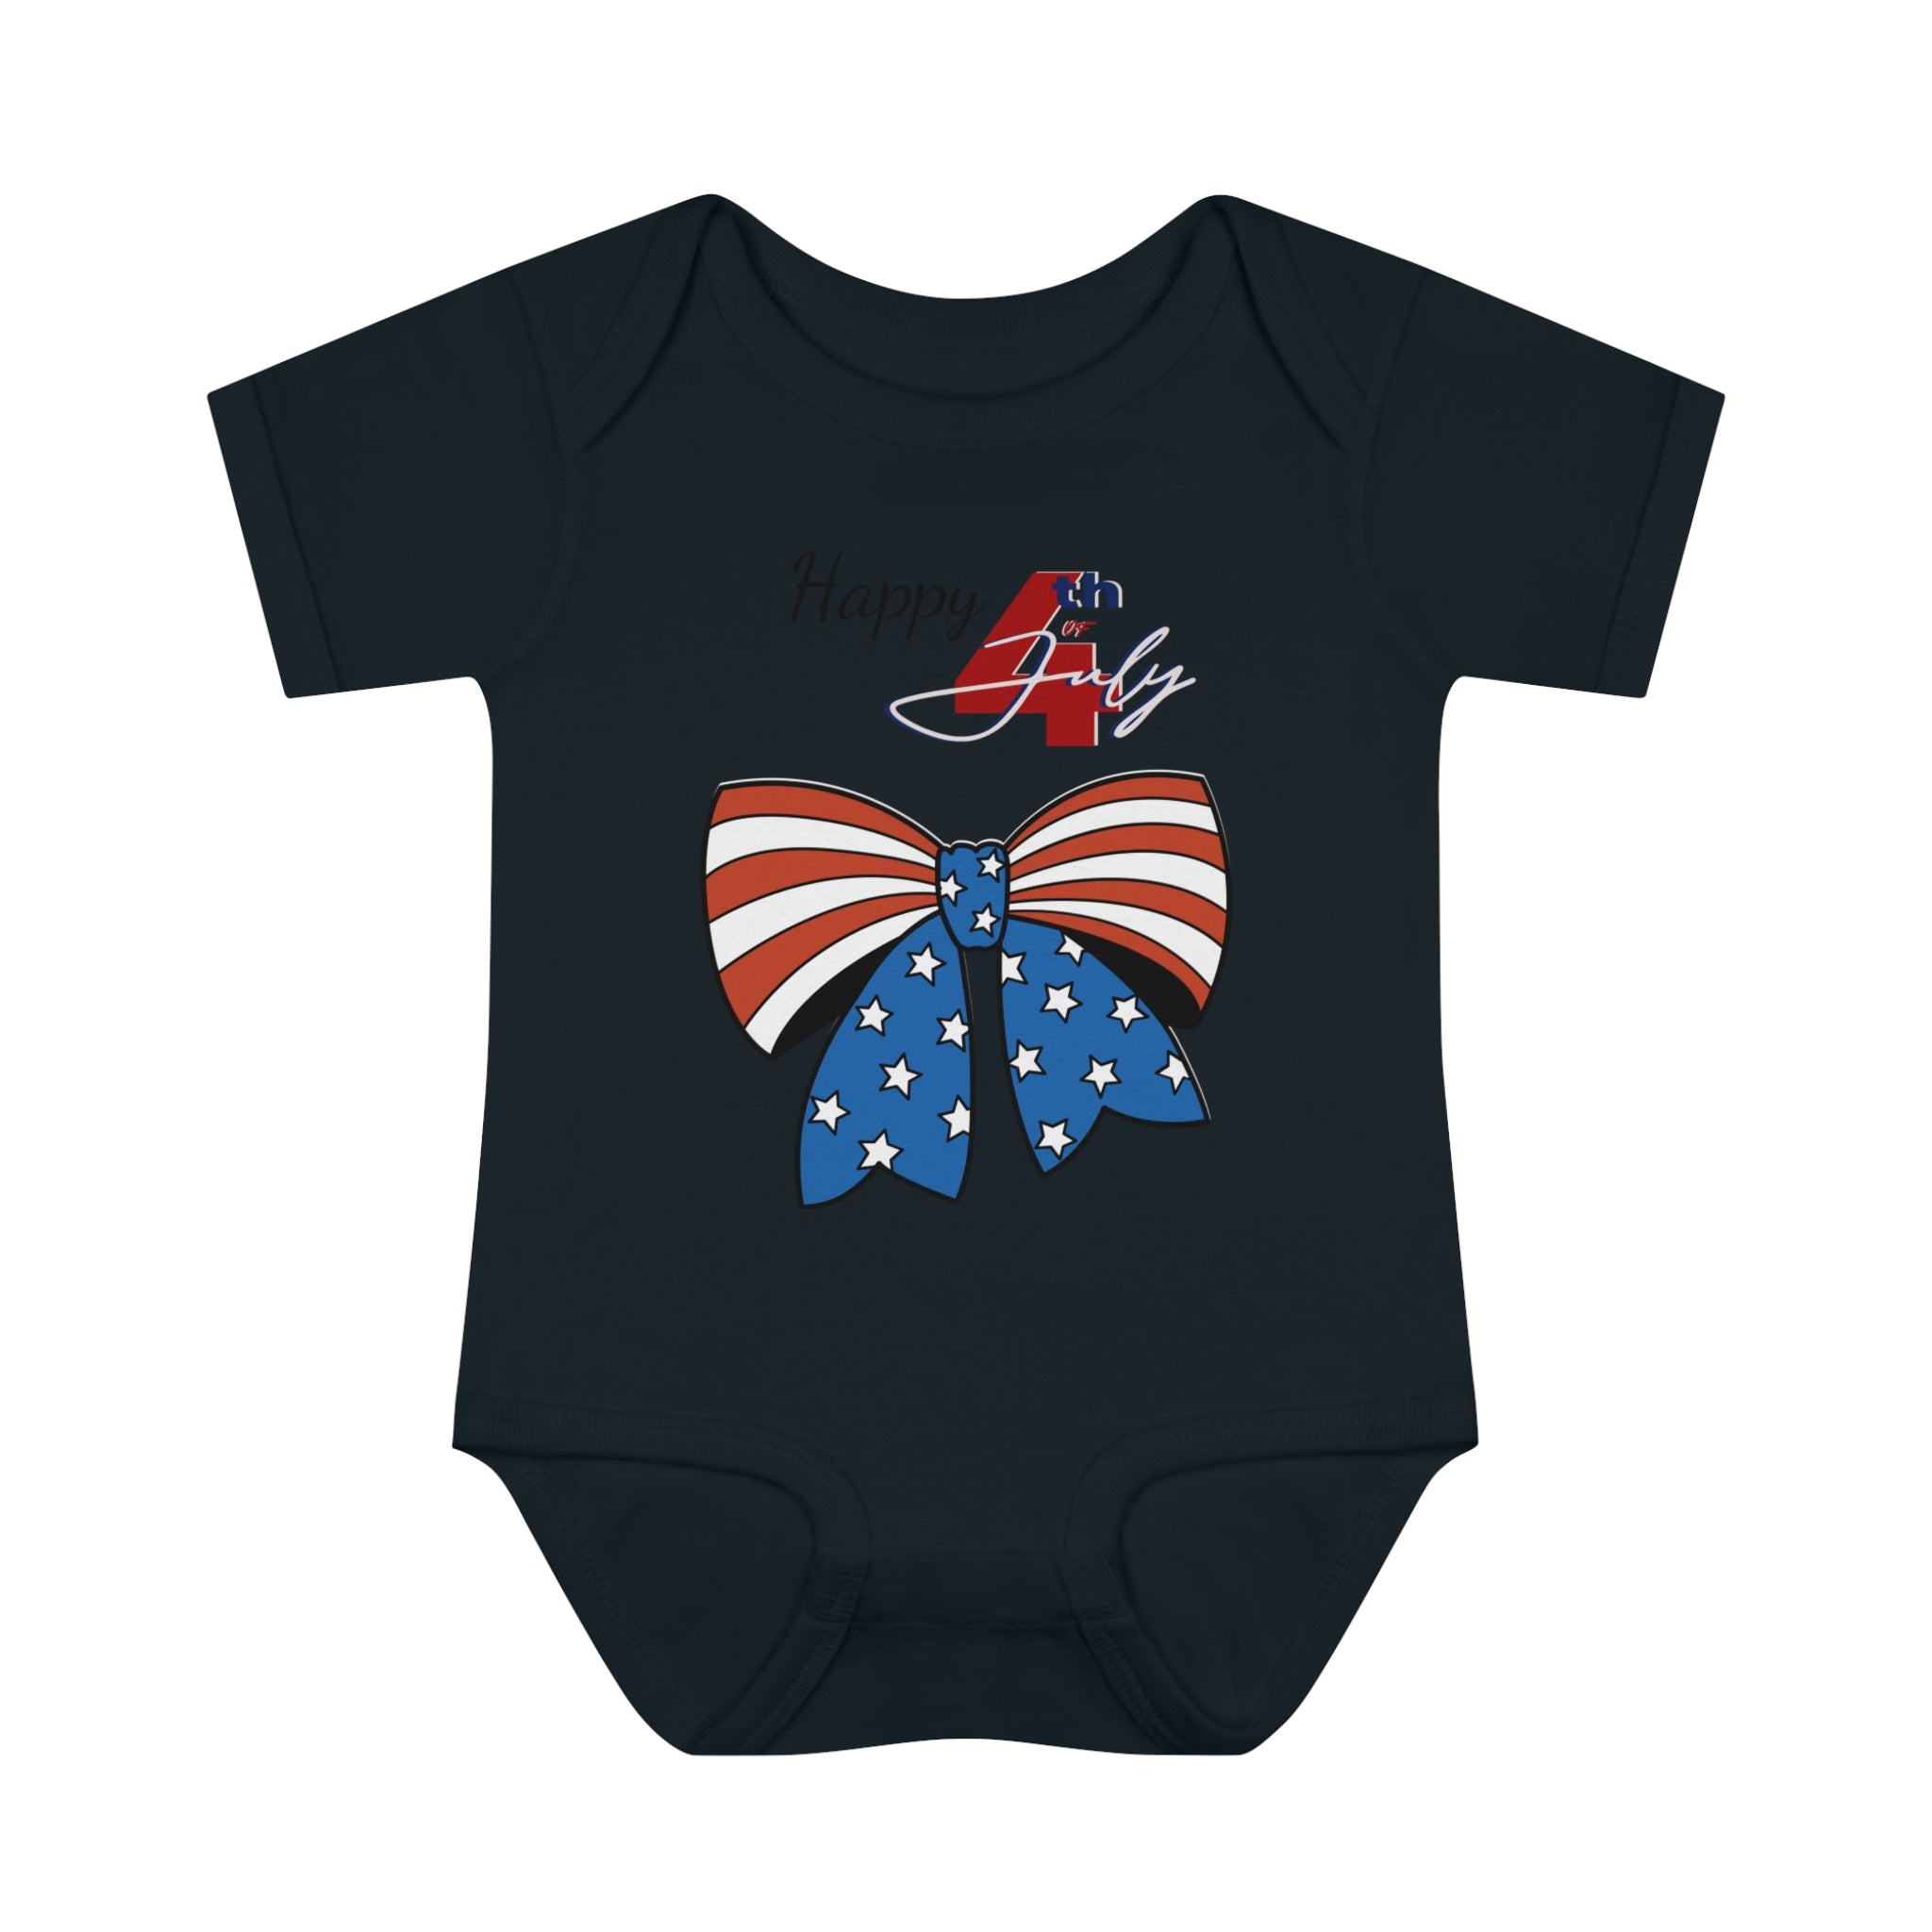 Happy 4th of July American Flag design Bow Tie Baby Bodysuit